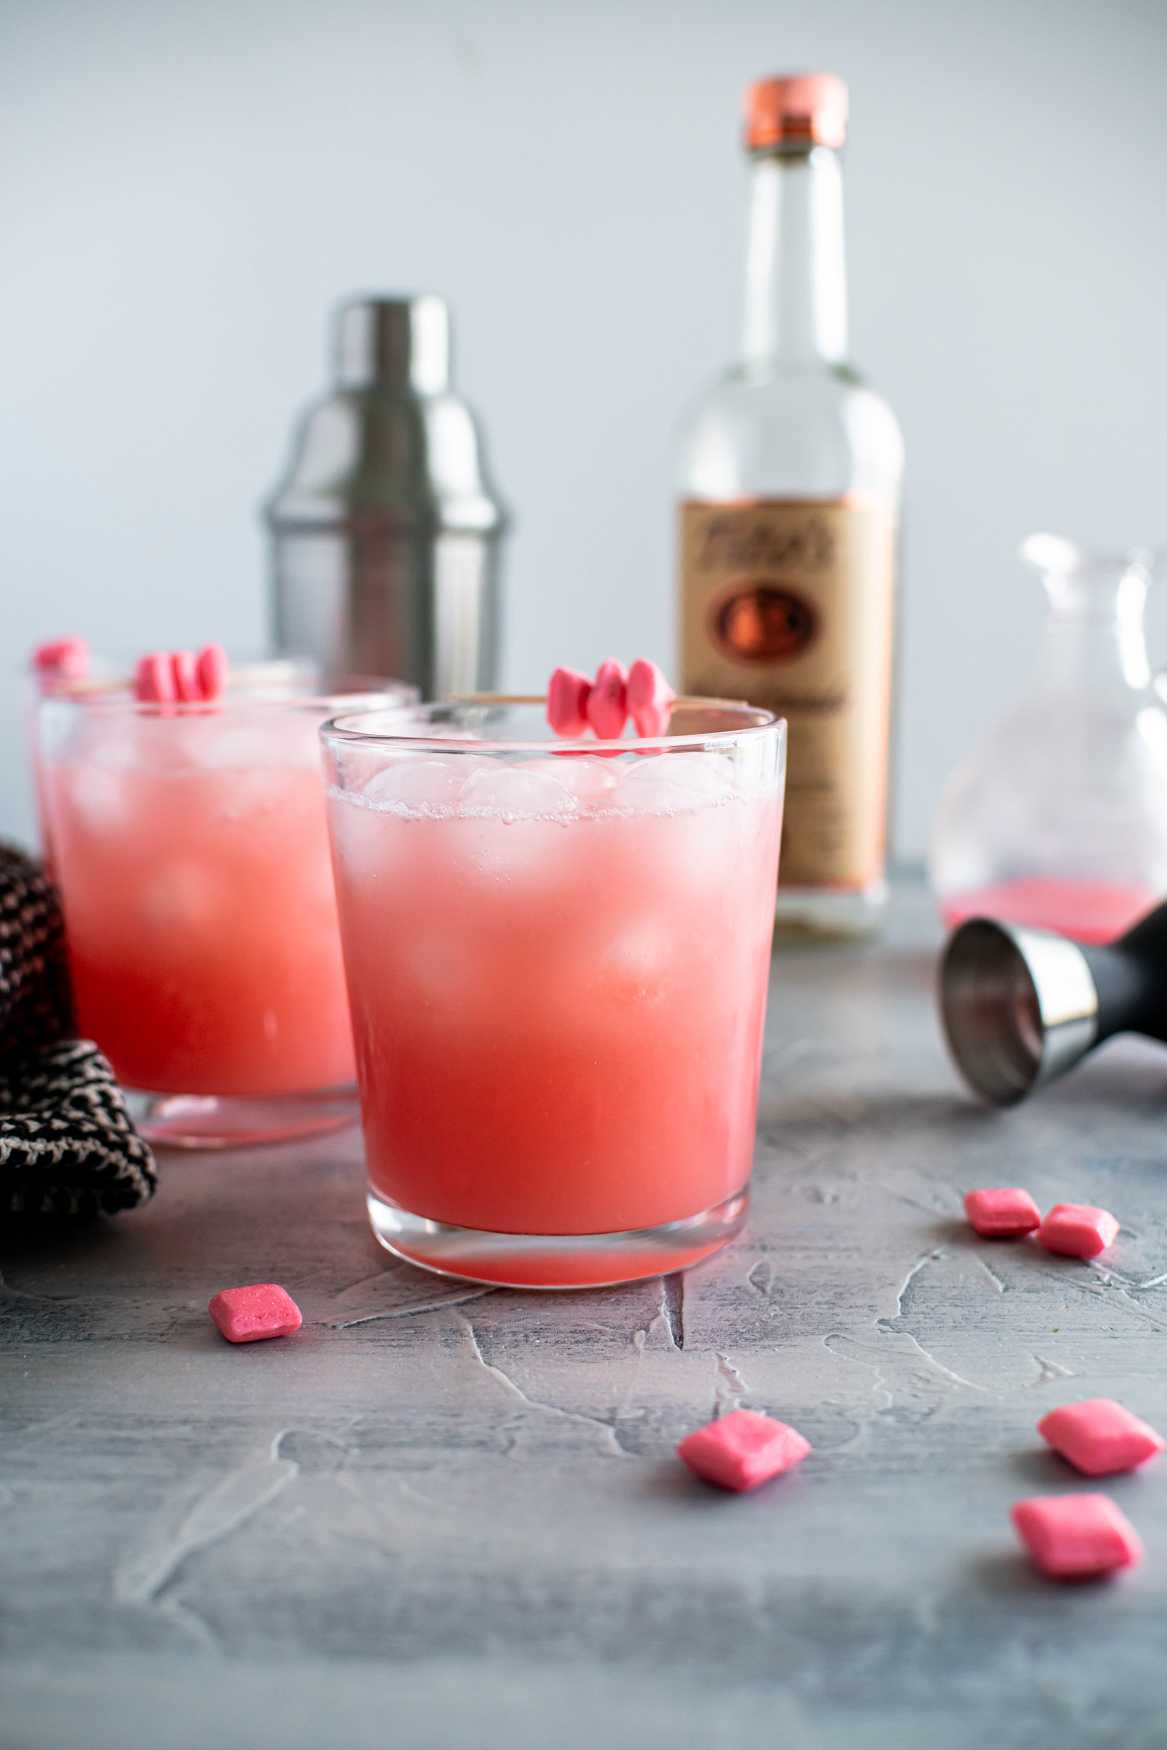 Two glasses of starburst cocktails with a shaker and a bottle of vodka in the background.